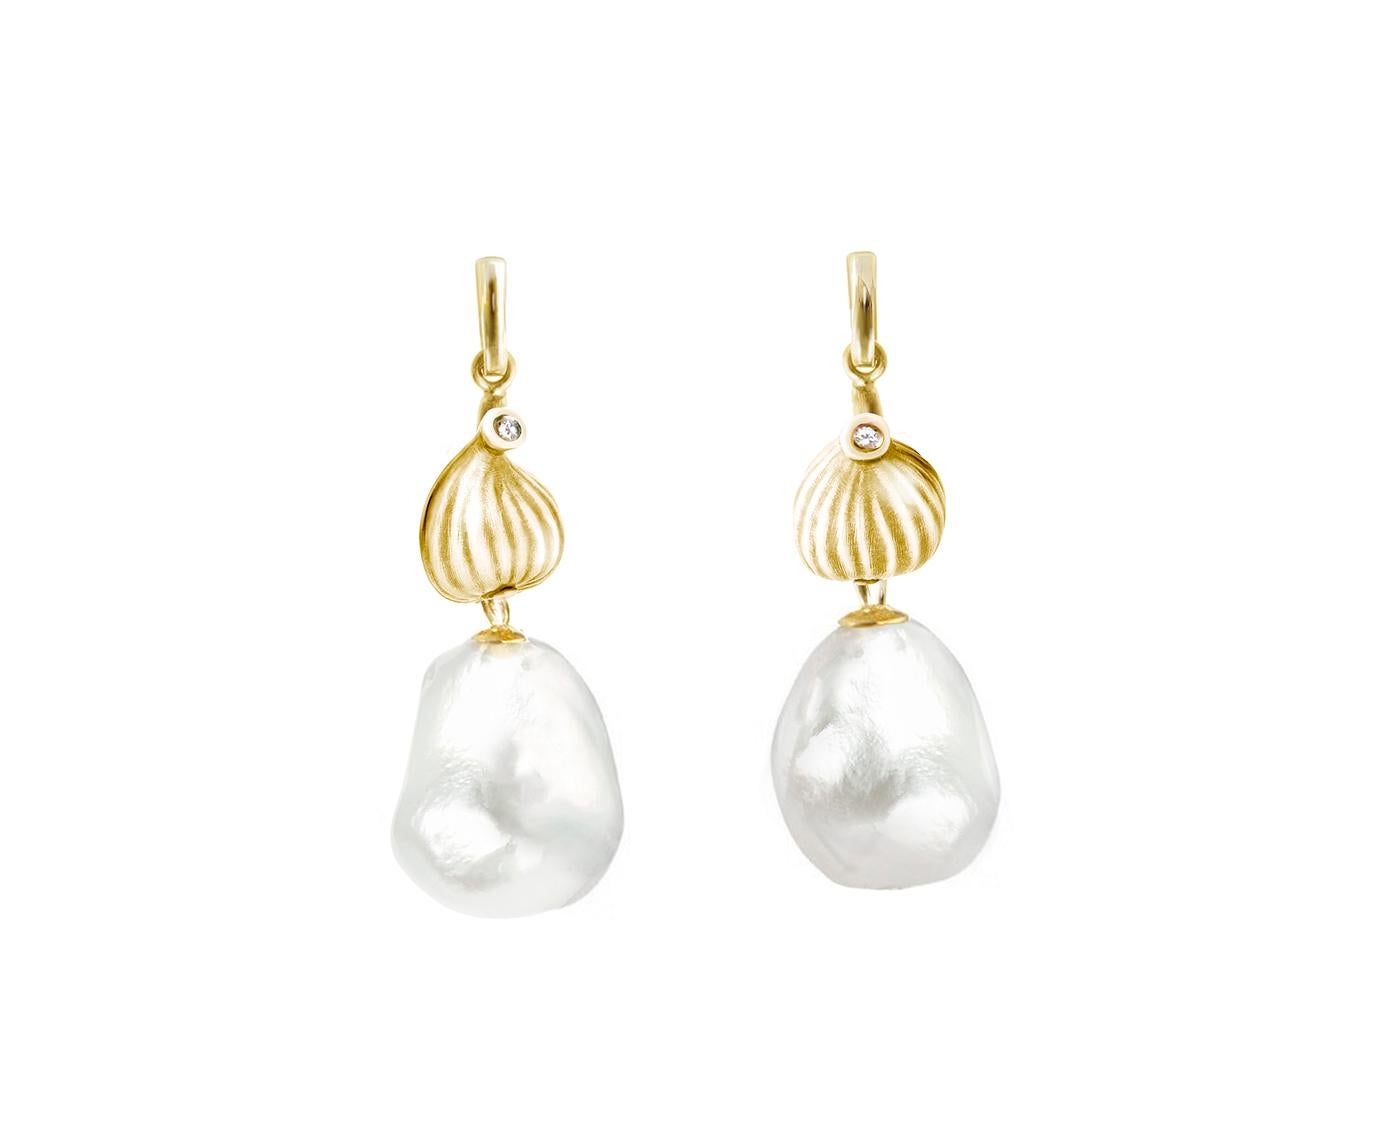 These contemporary Fig drop earrings are crafted from 18-karat yellow gold, adorned with a freshwater baroque pearl and two diamonds. They have been featured in a review by Vogue UA. We use only top-quality natural diamonds, VS and F-G, and work